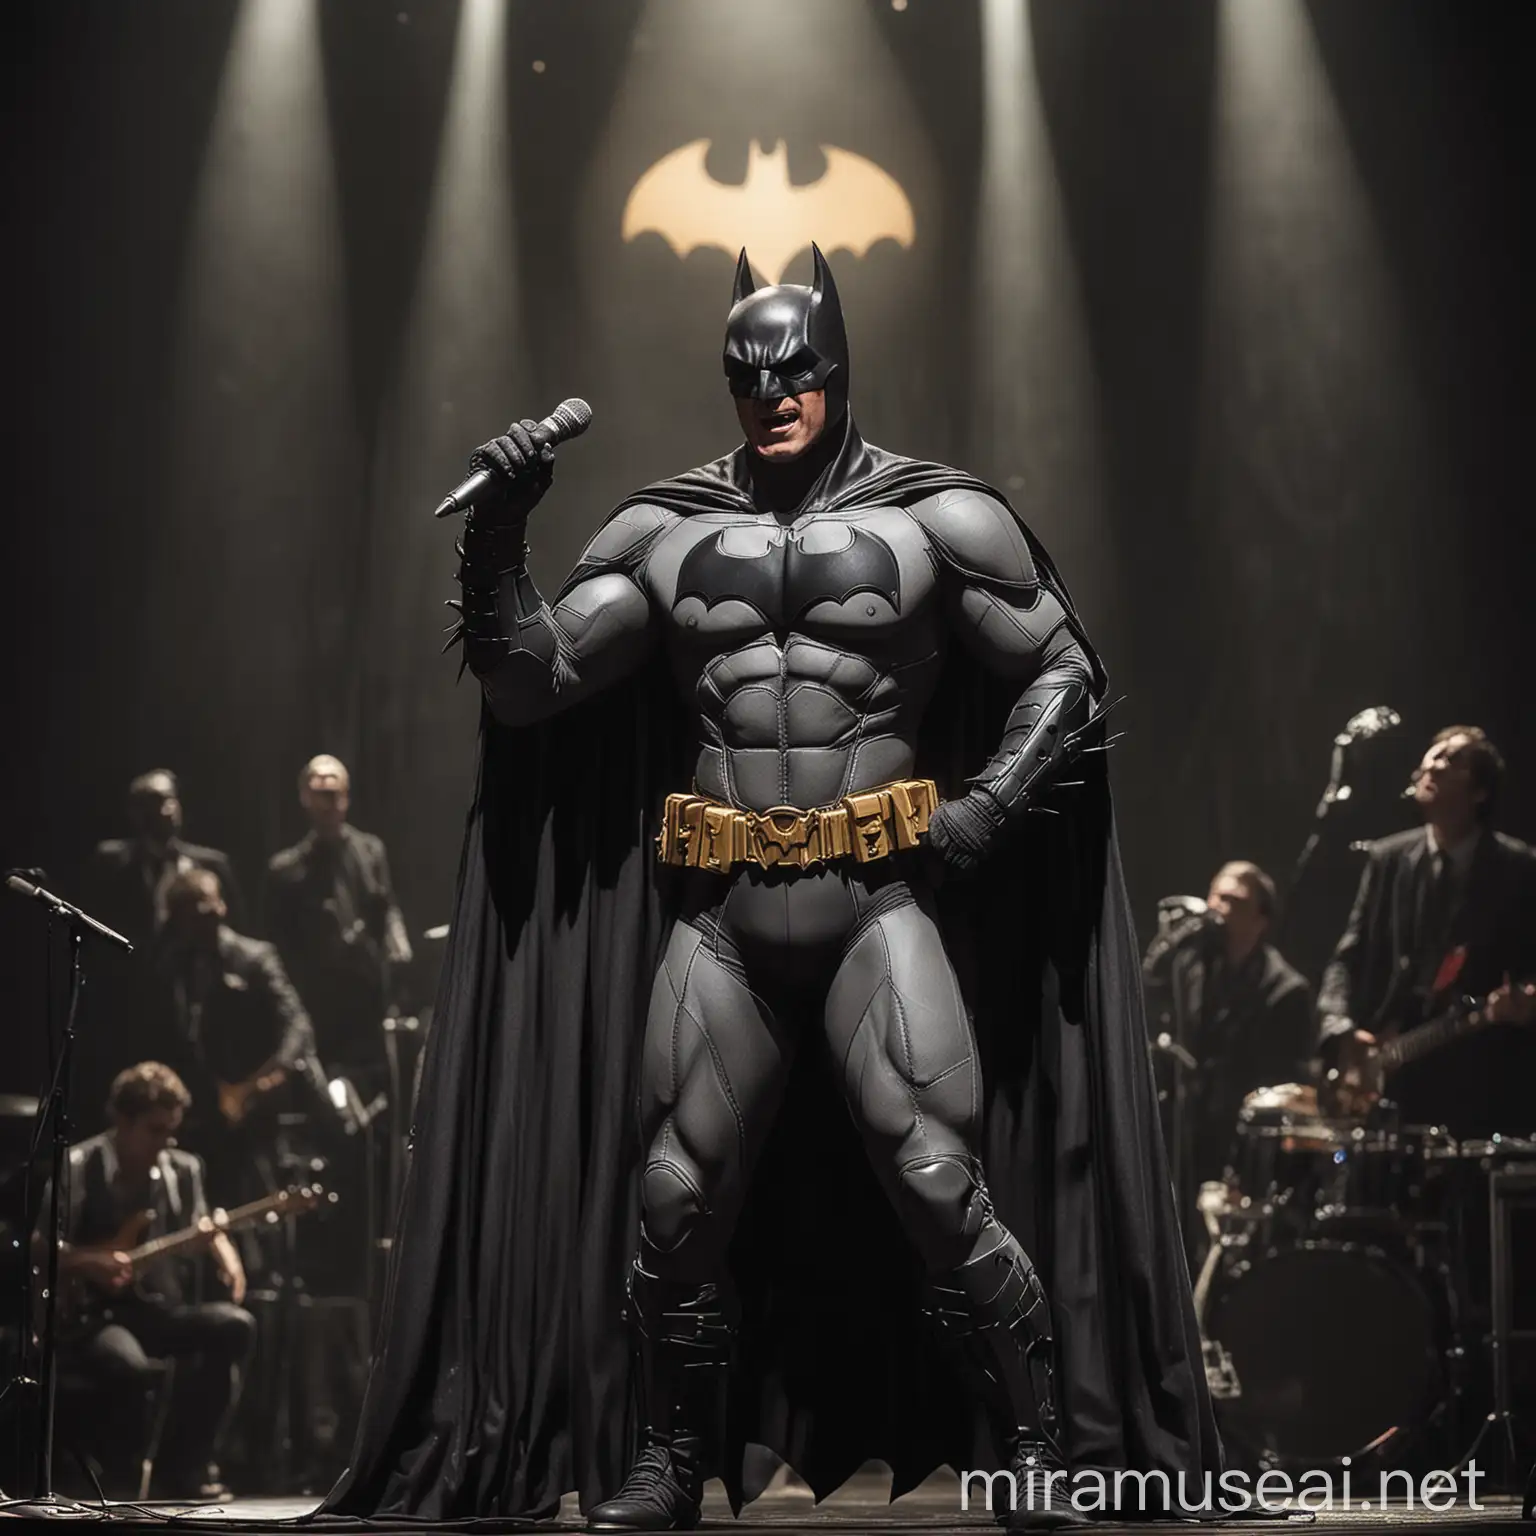 Batman Performing Solo Song on Stage with Microphone